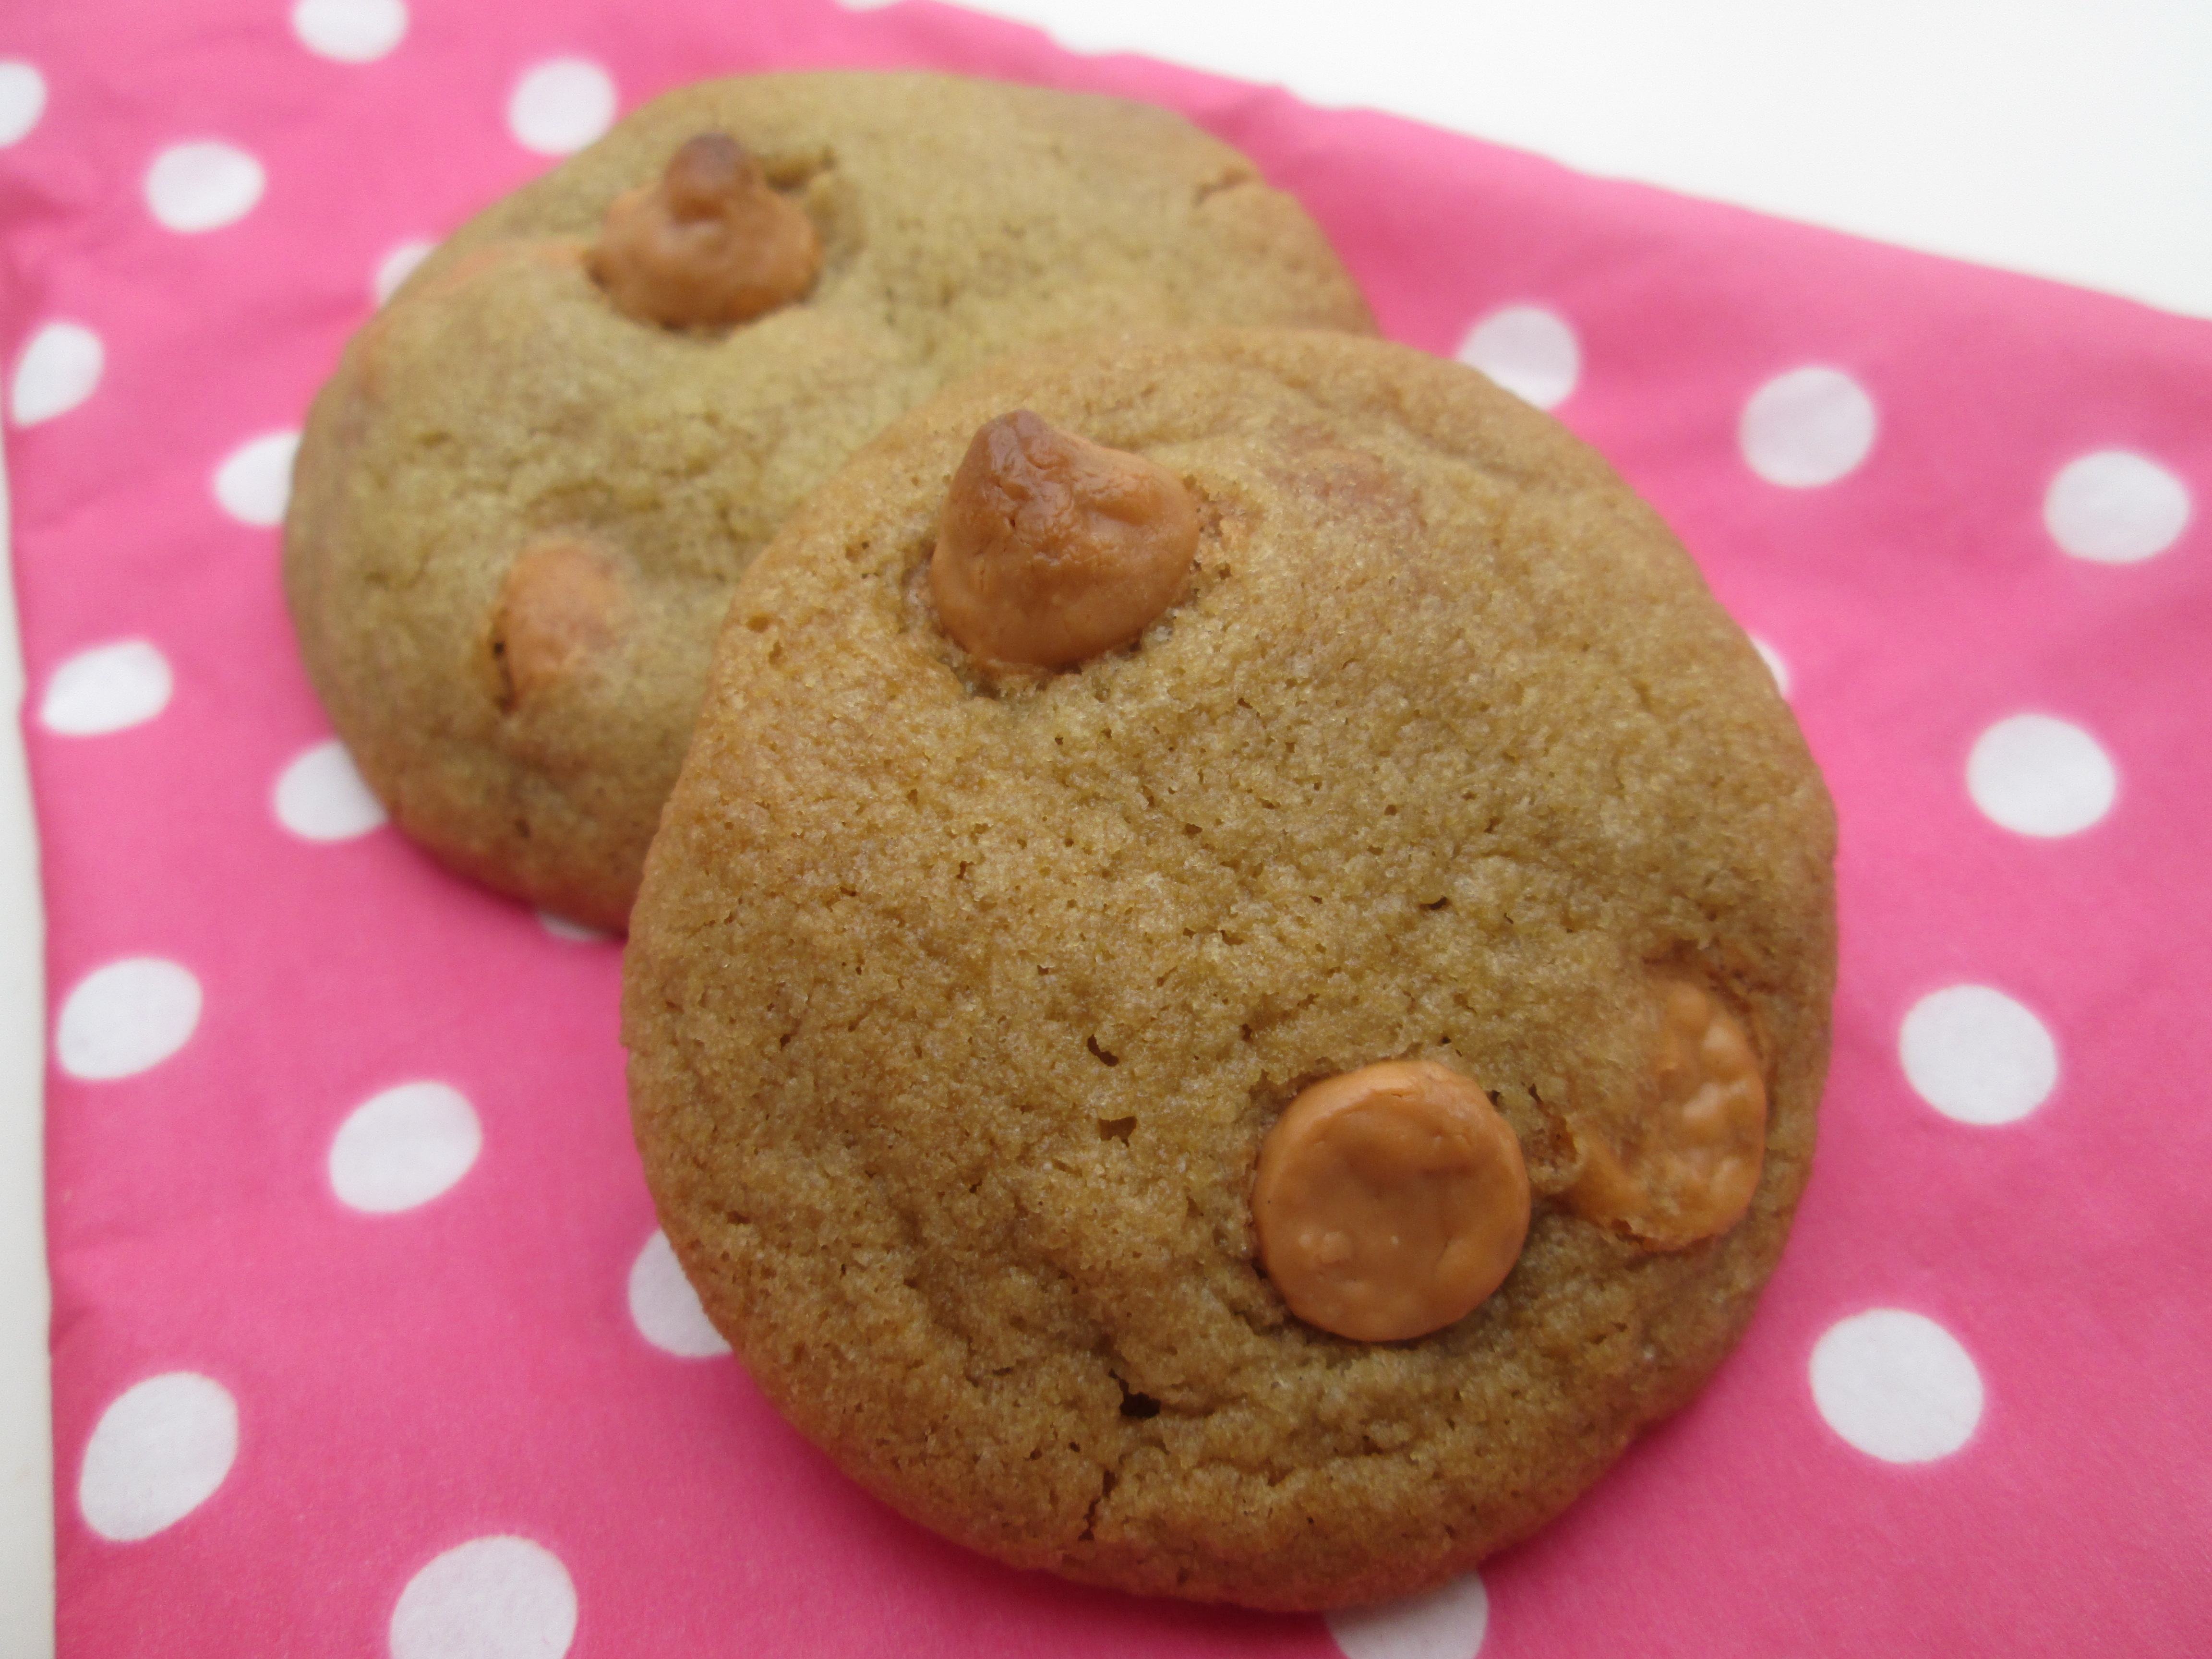 Chocolate-chip-cookie-recipe-lucyloves-foodblog